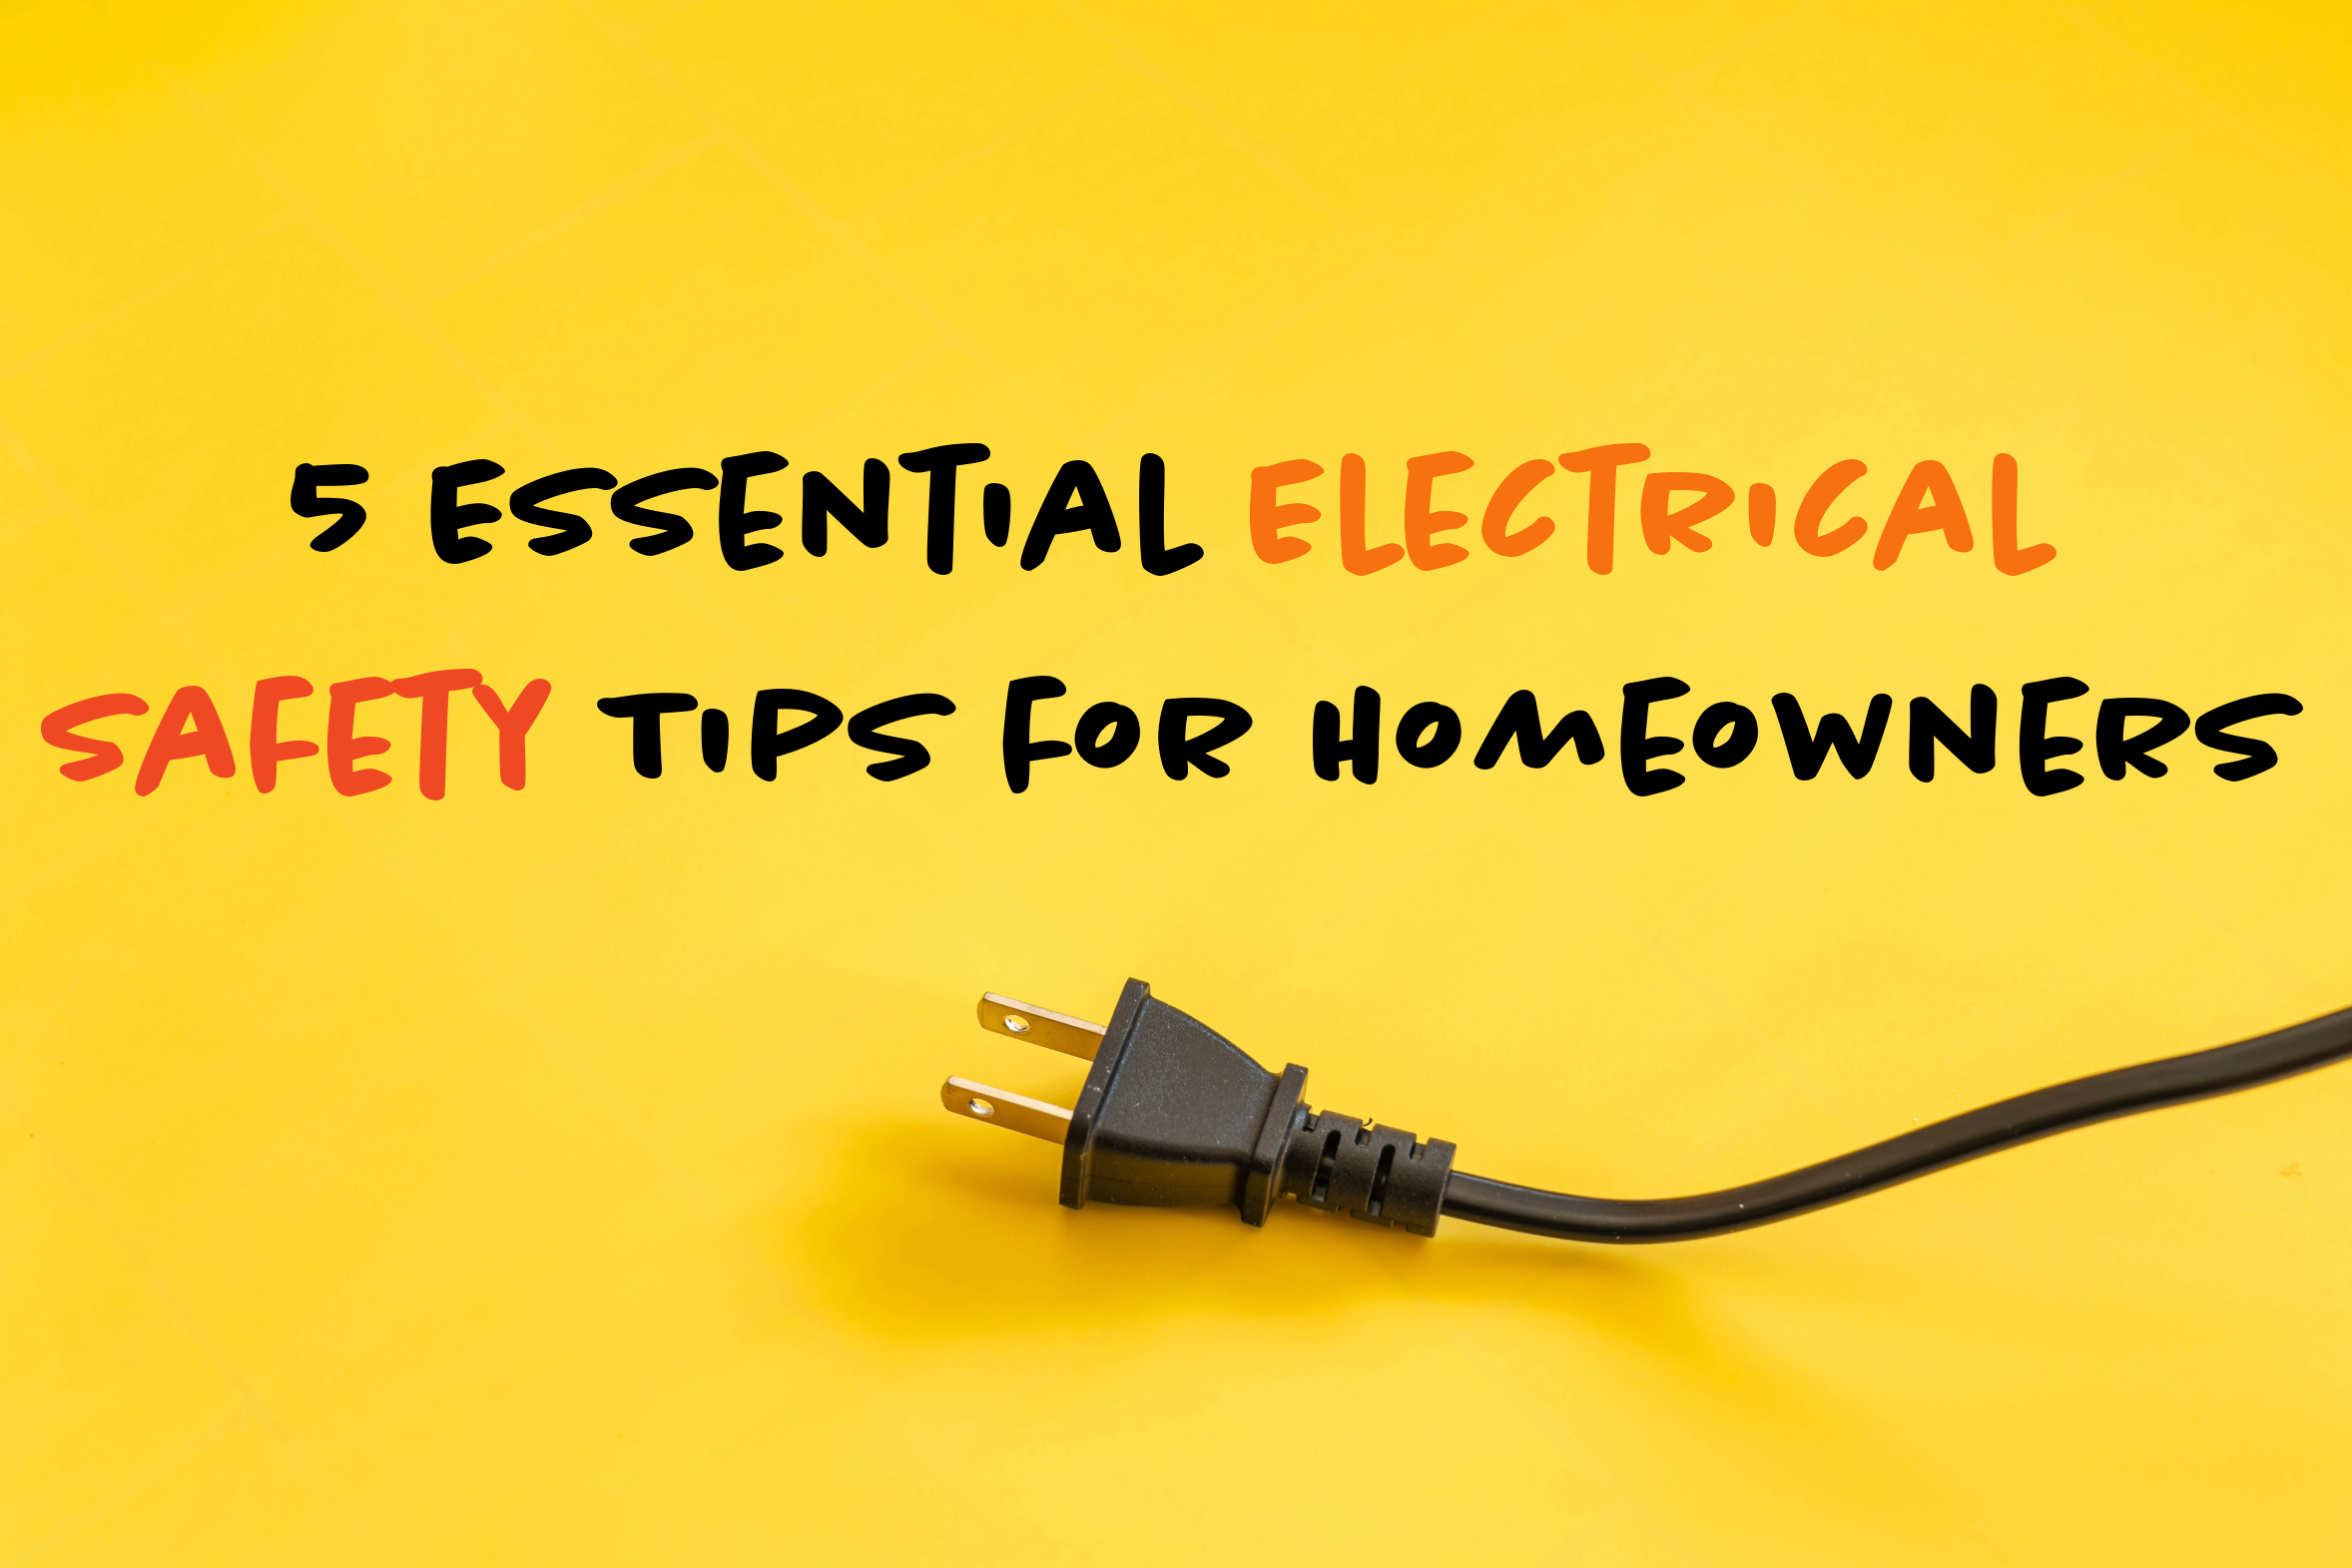 5 Essential Electrical Safety Tips for Homeowners